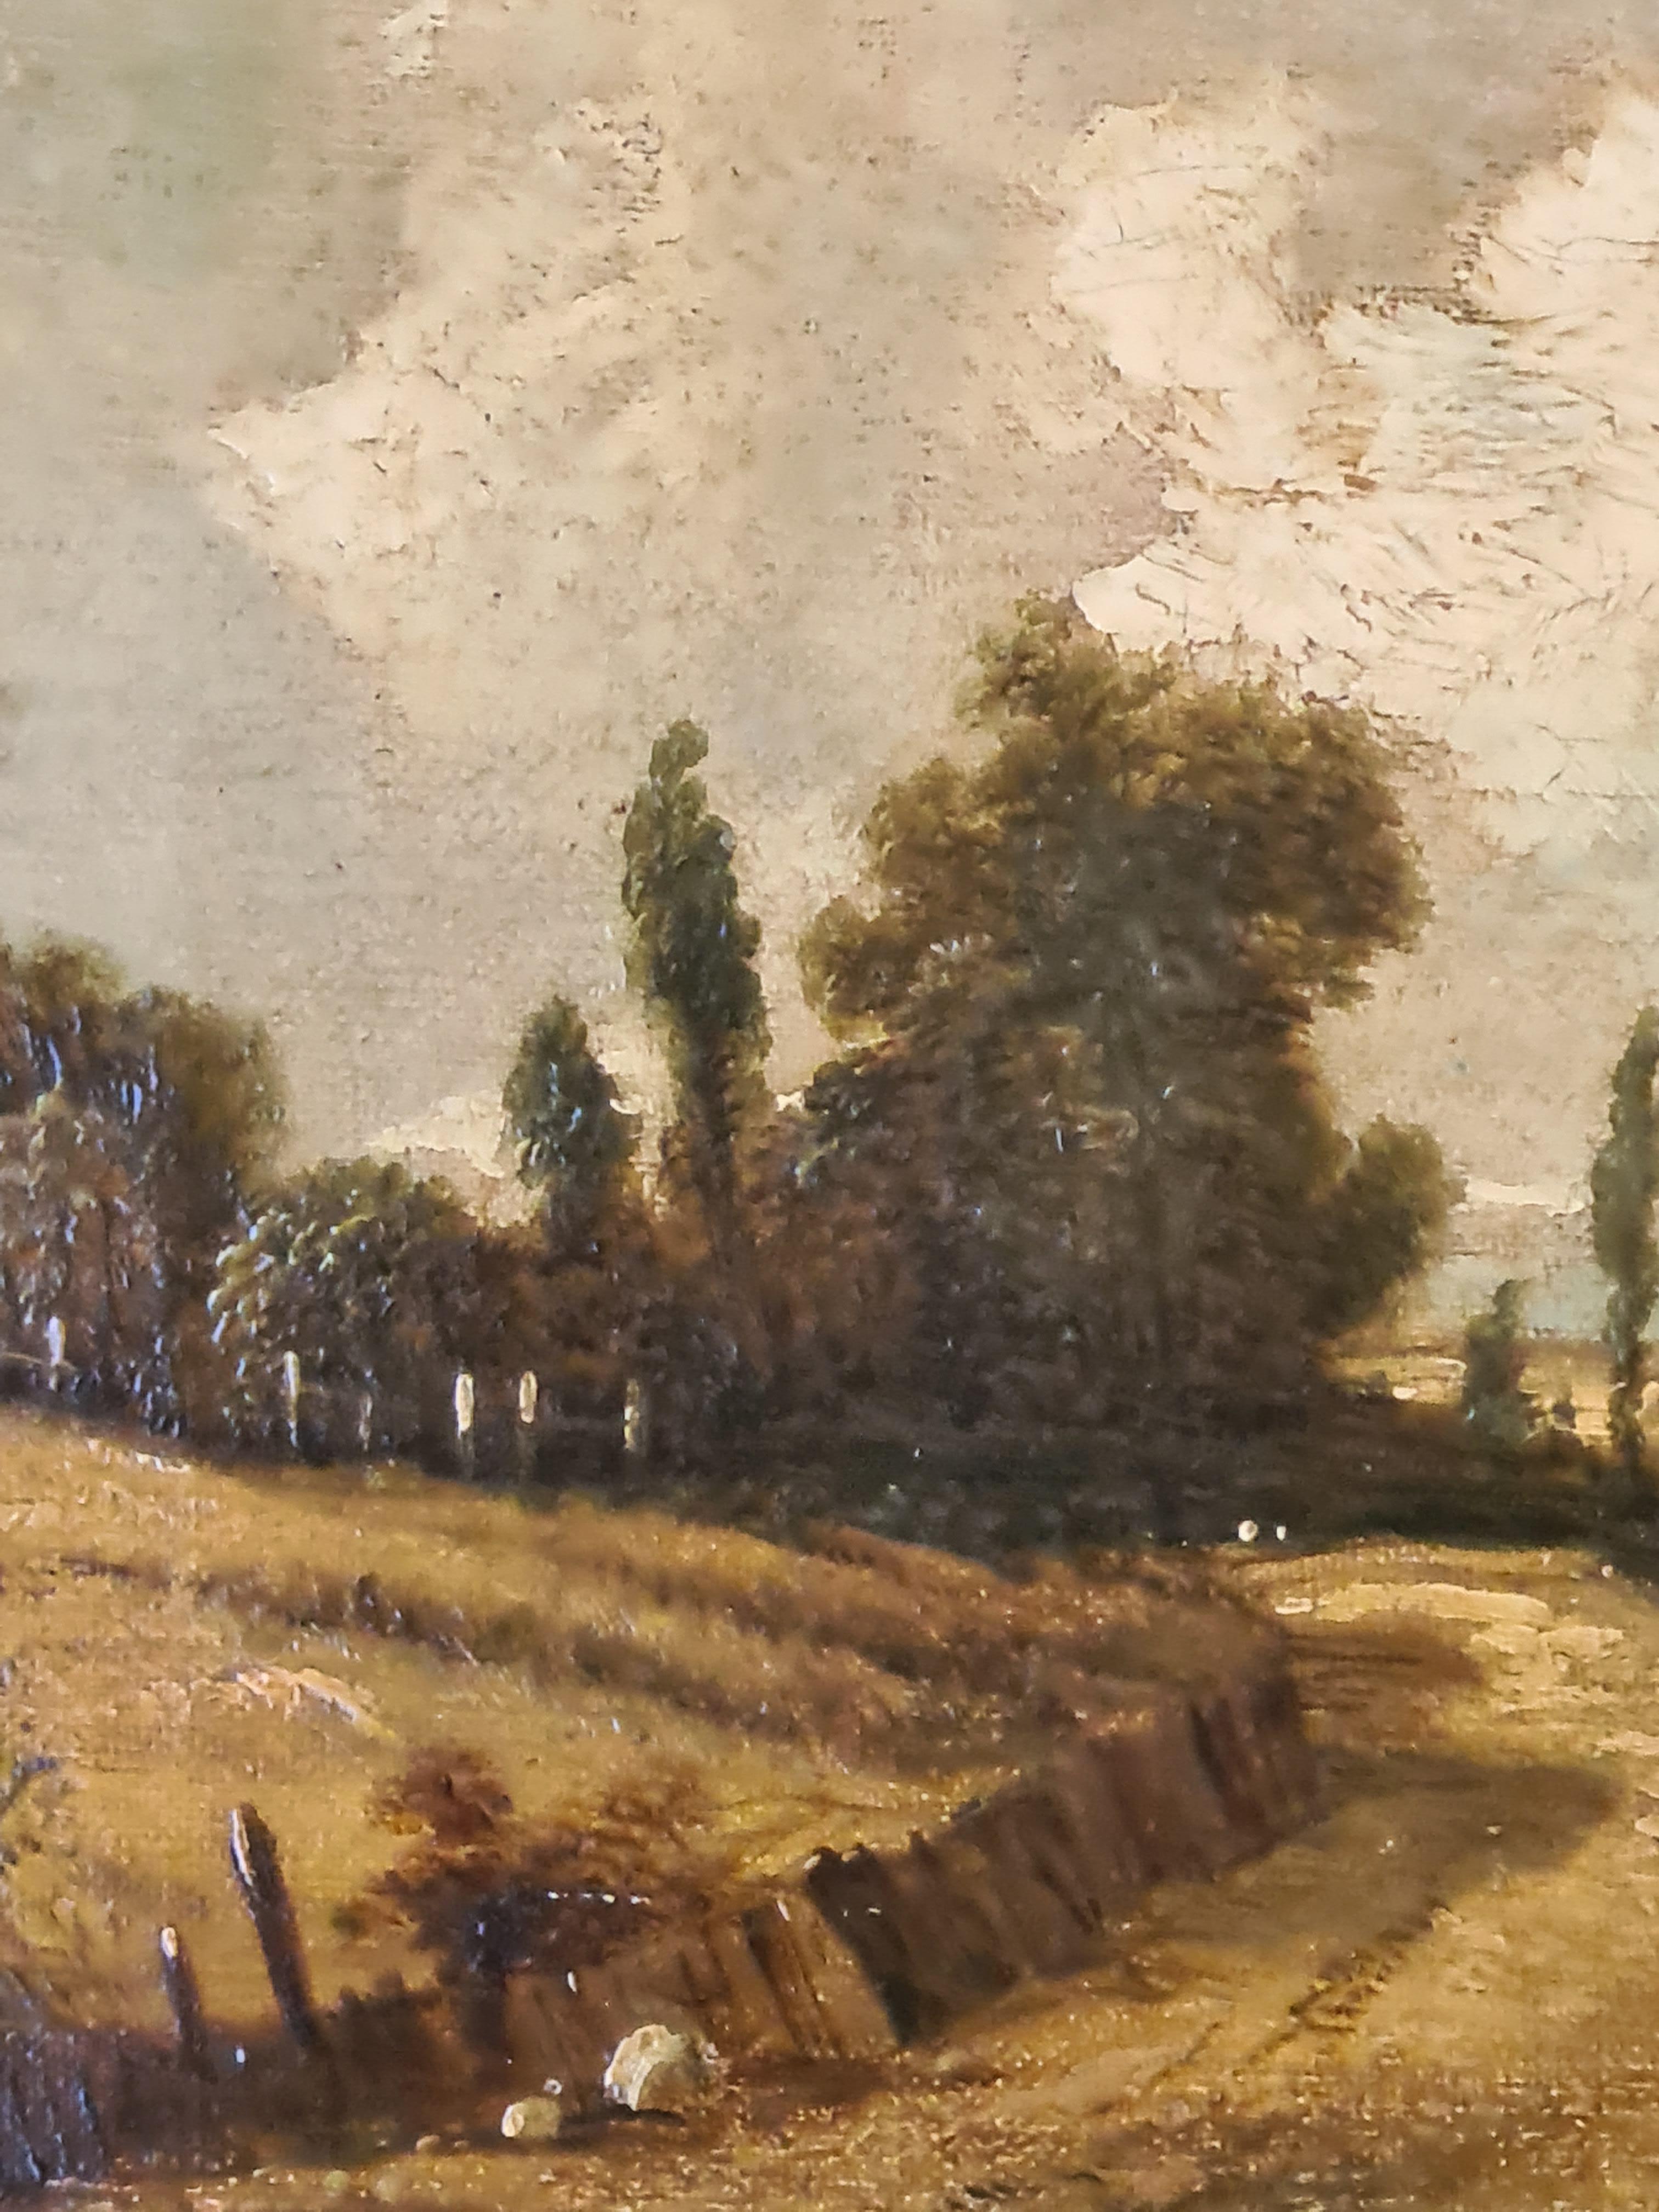 Barbizon Period English Landscape, Oil on Canvas, Circle of John Constable - Barbizon School Painting by Alfred Vickers